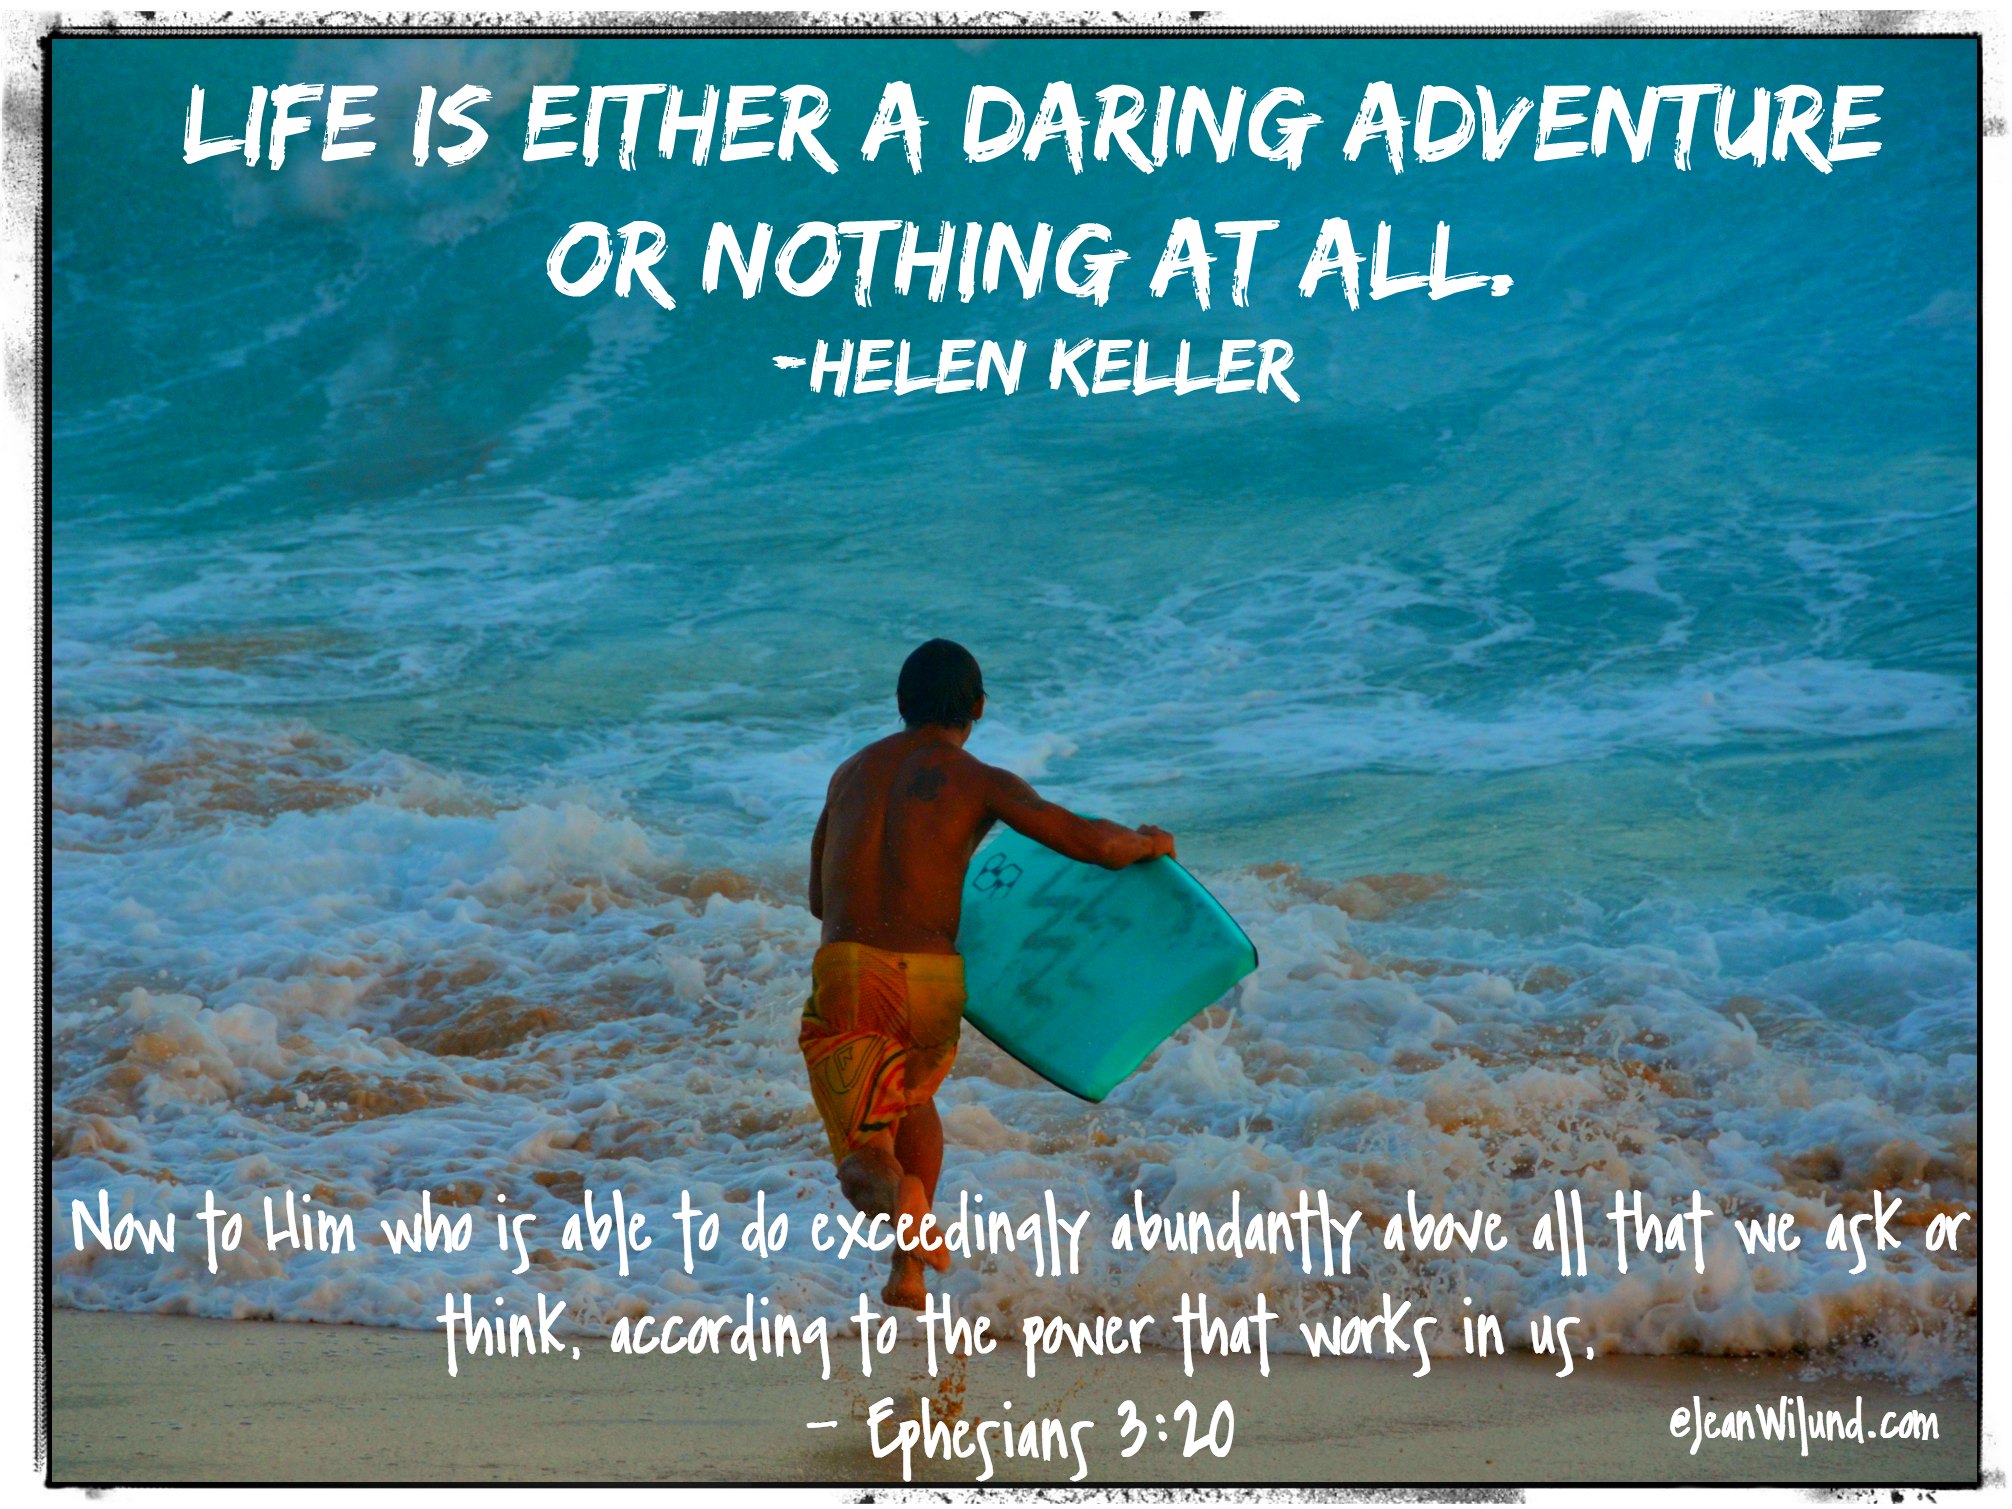 Life is either a daring adventure or nothing at all. Trust God and take it on. (Ephesians 3:20) via www.Jeanwilund.com